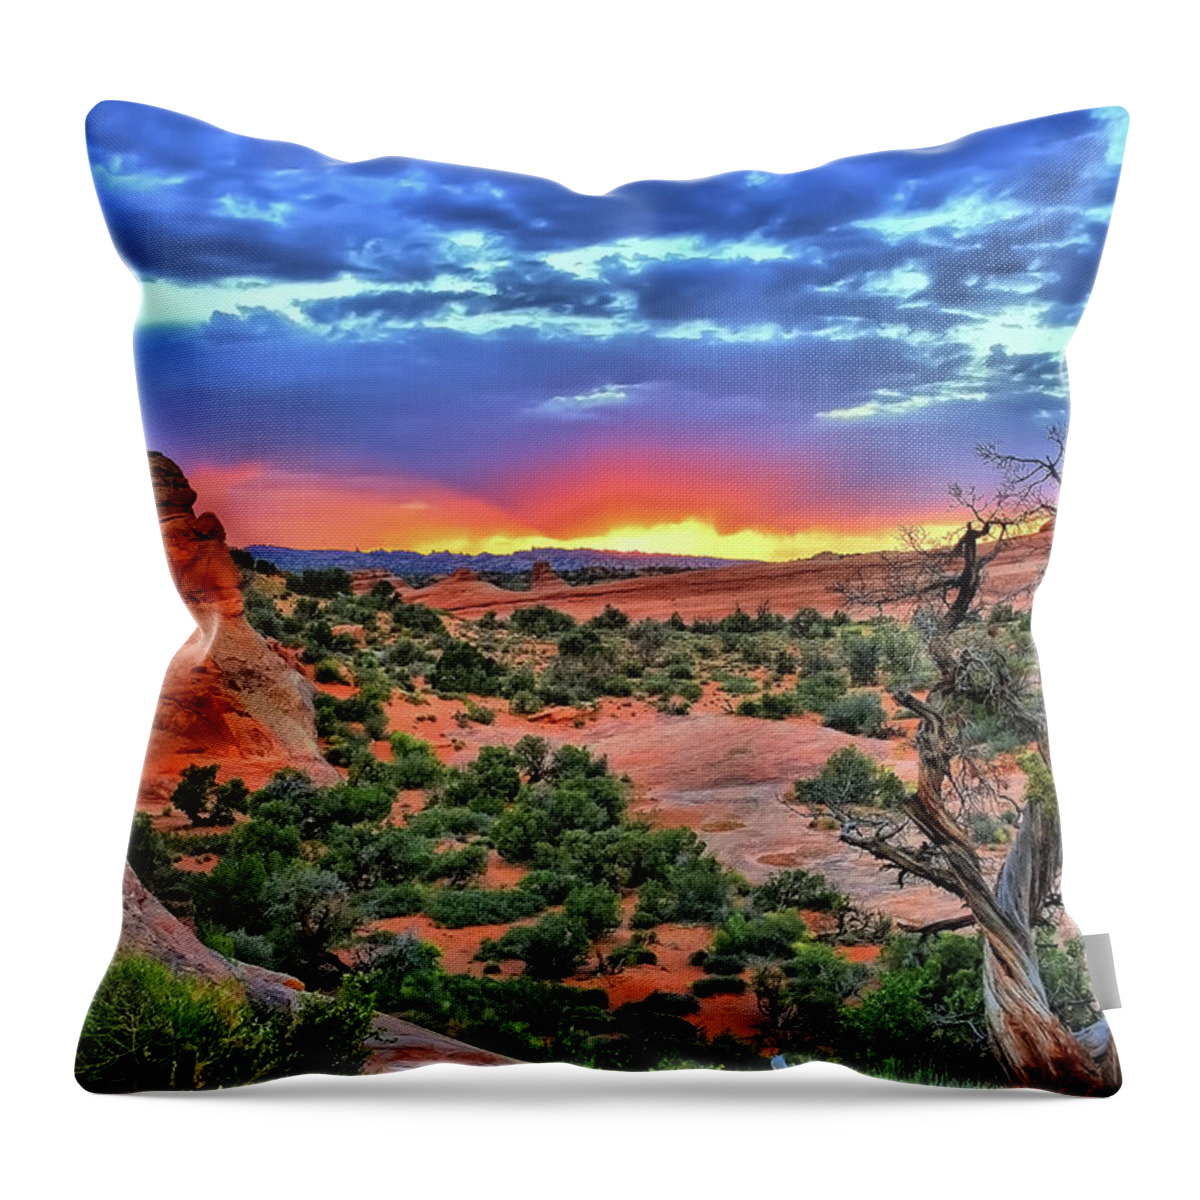 Utah Wall Art Throw Pillow featuring the photograph Arches National Park Sunset by Gregory Ballos